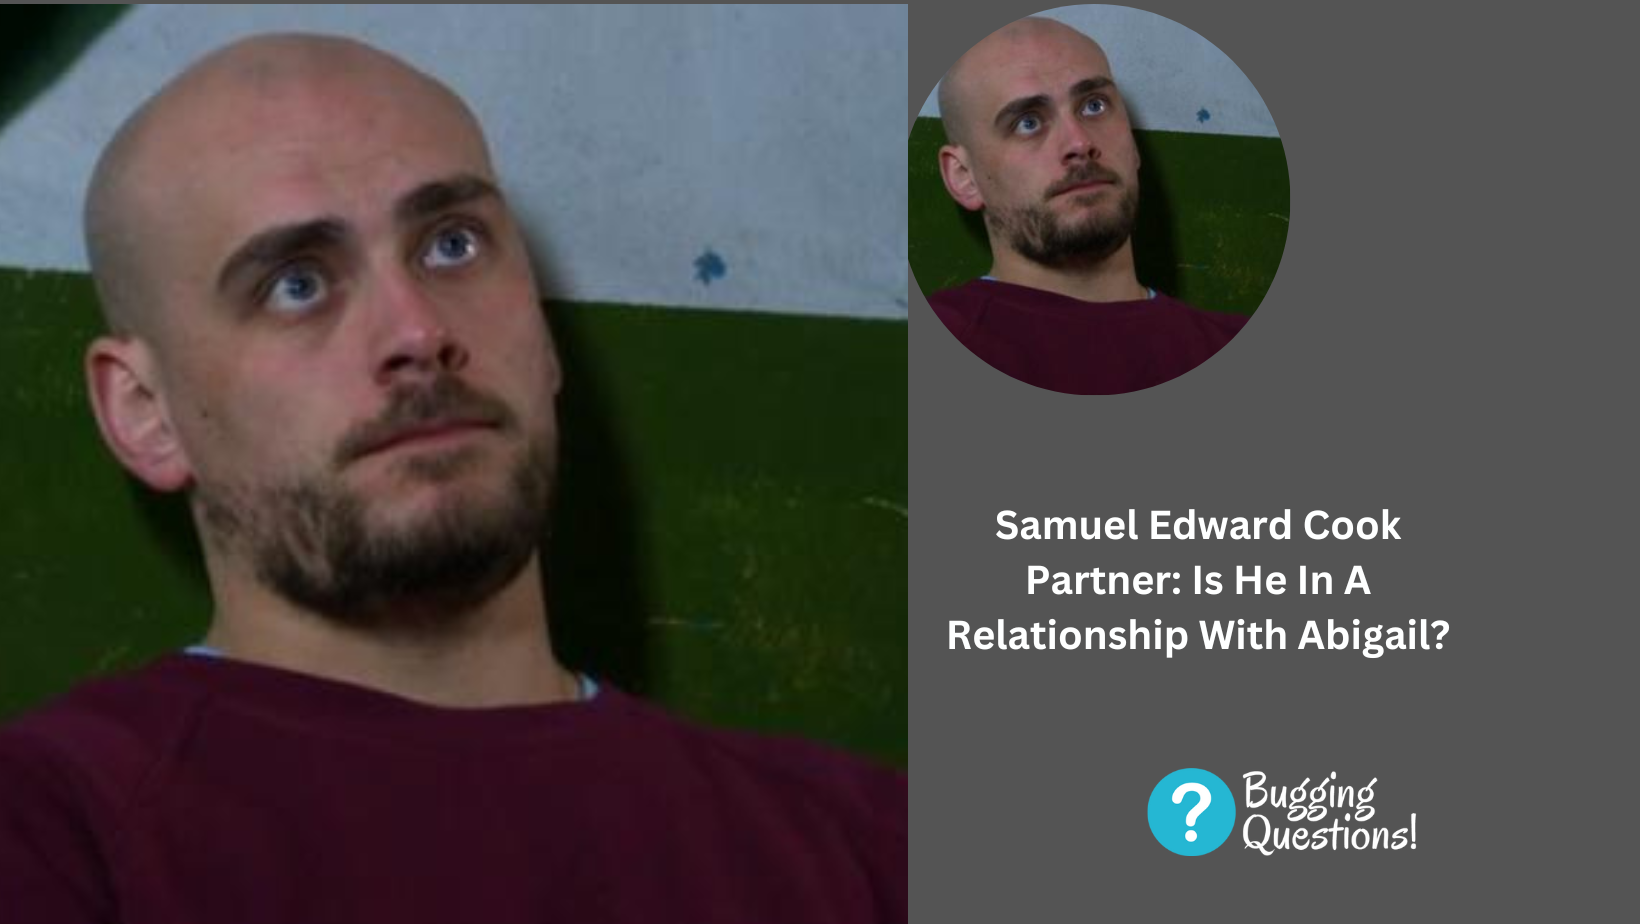 Samuel Edward Cook Partner: Is He In A Relationship With Abigail?